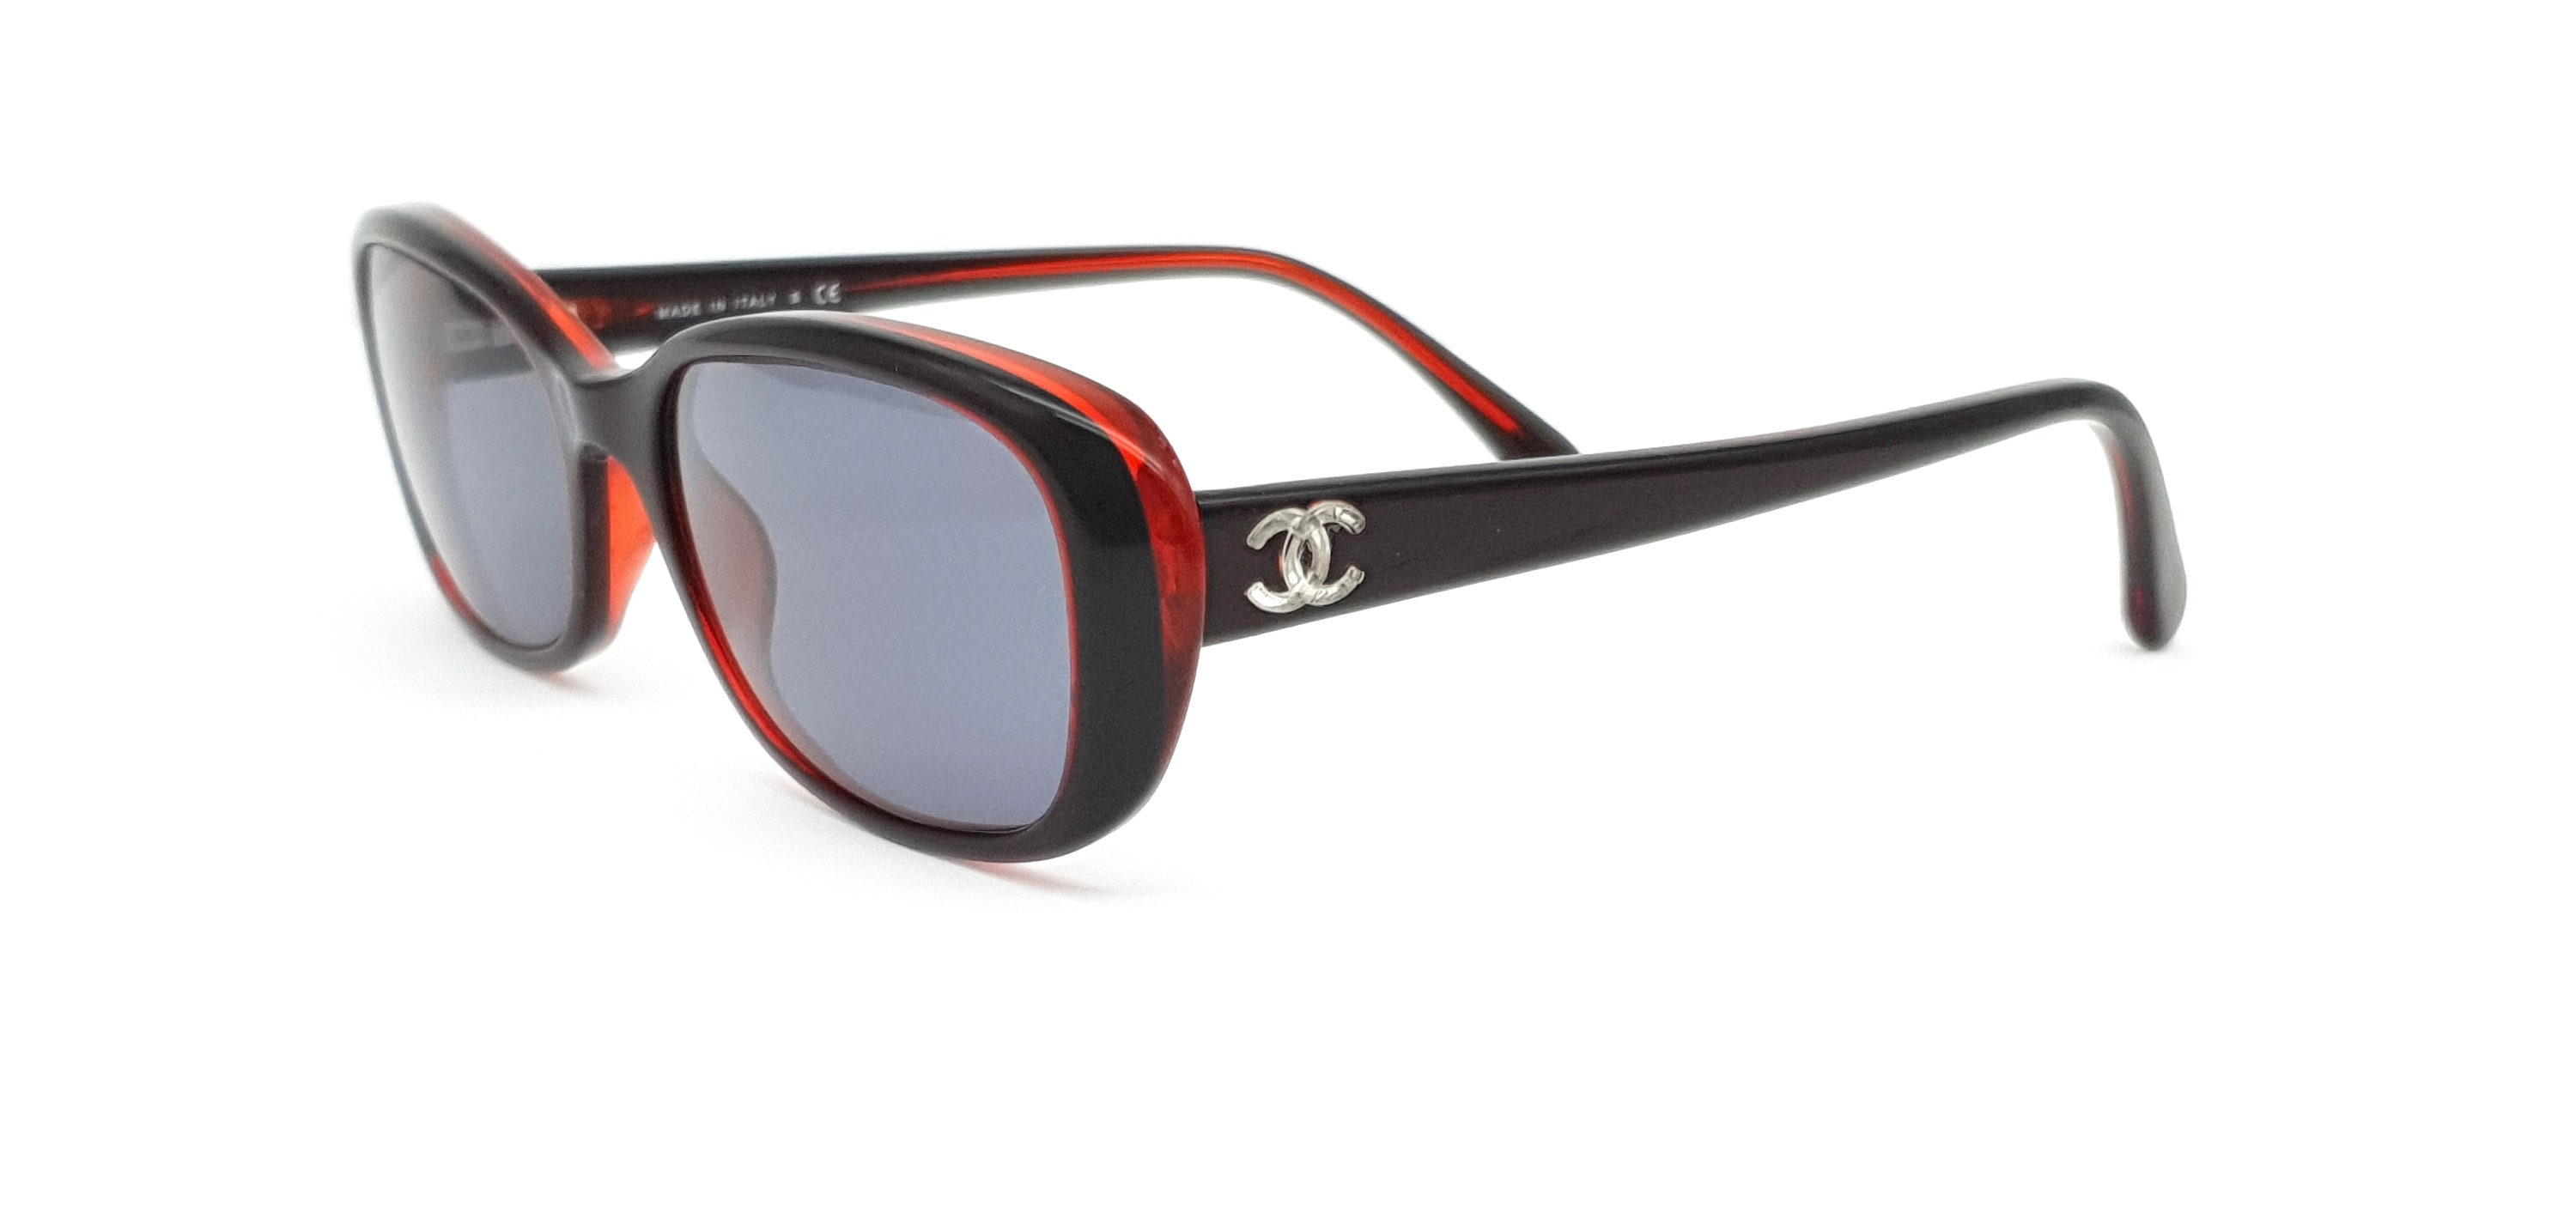 Chanel 3187 Sunglasses Retro Vintage Red Brown New Lenses 